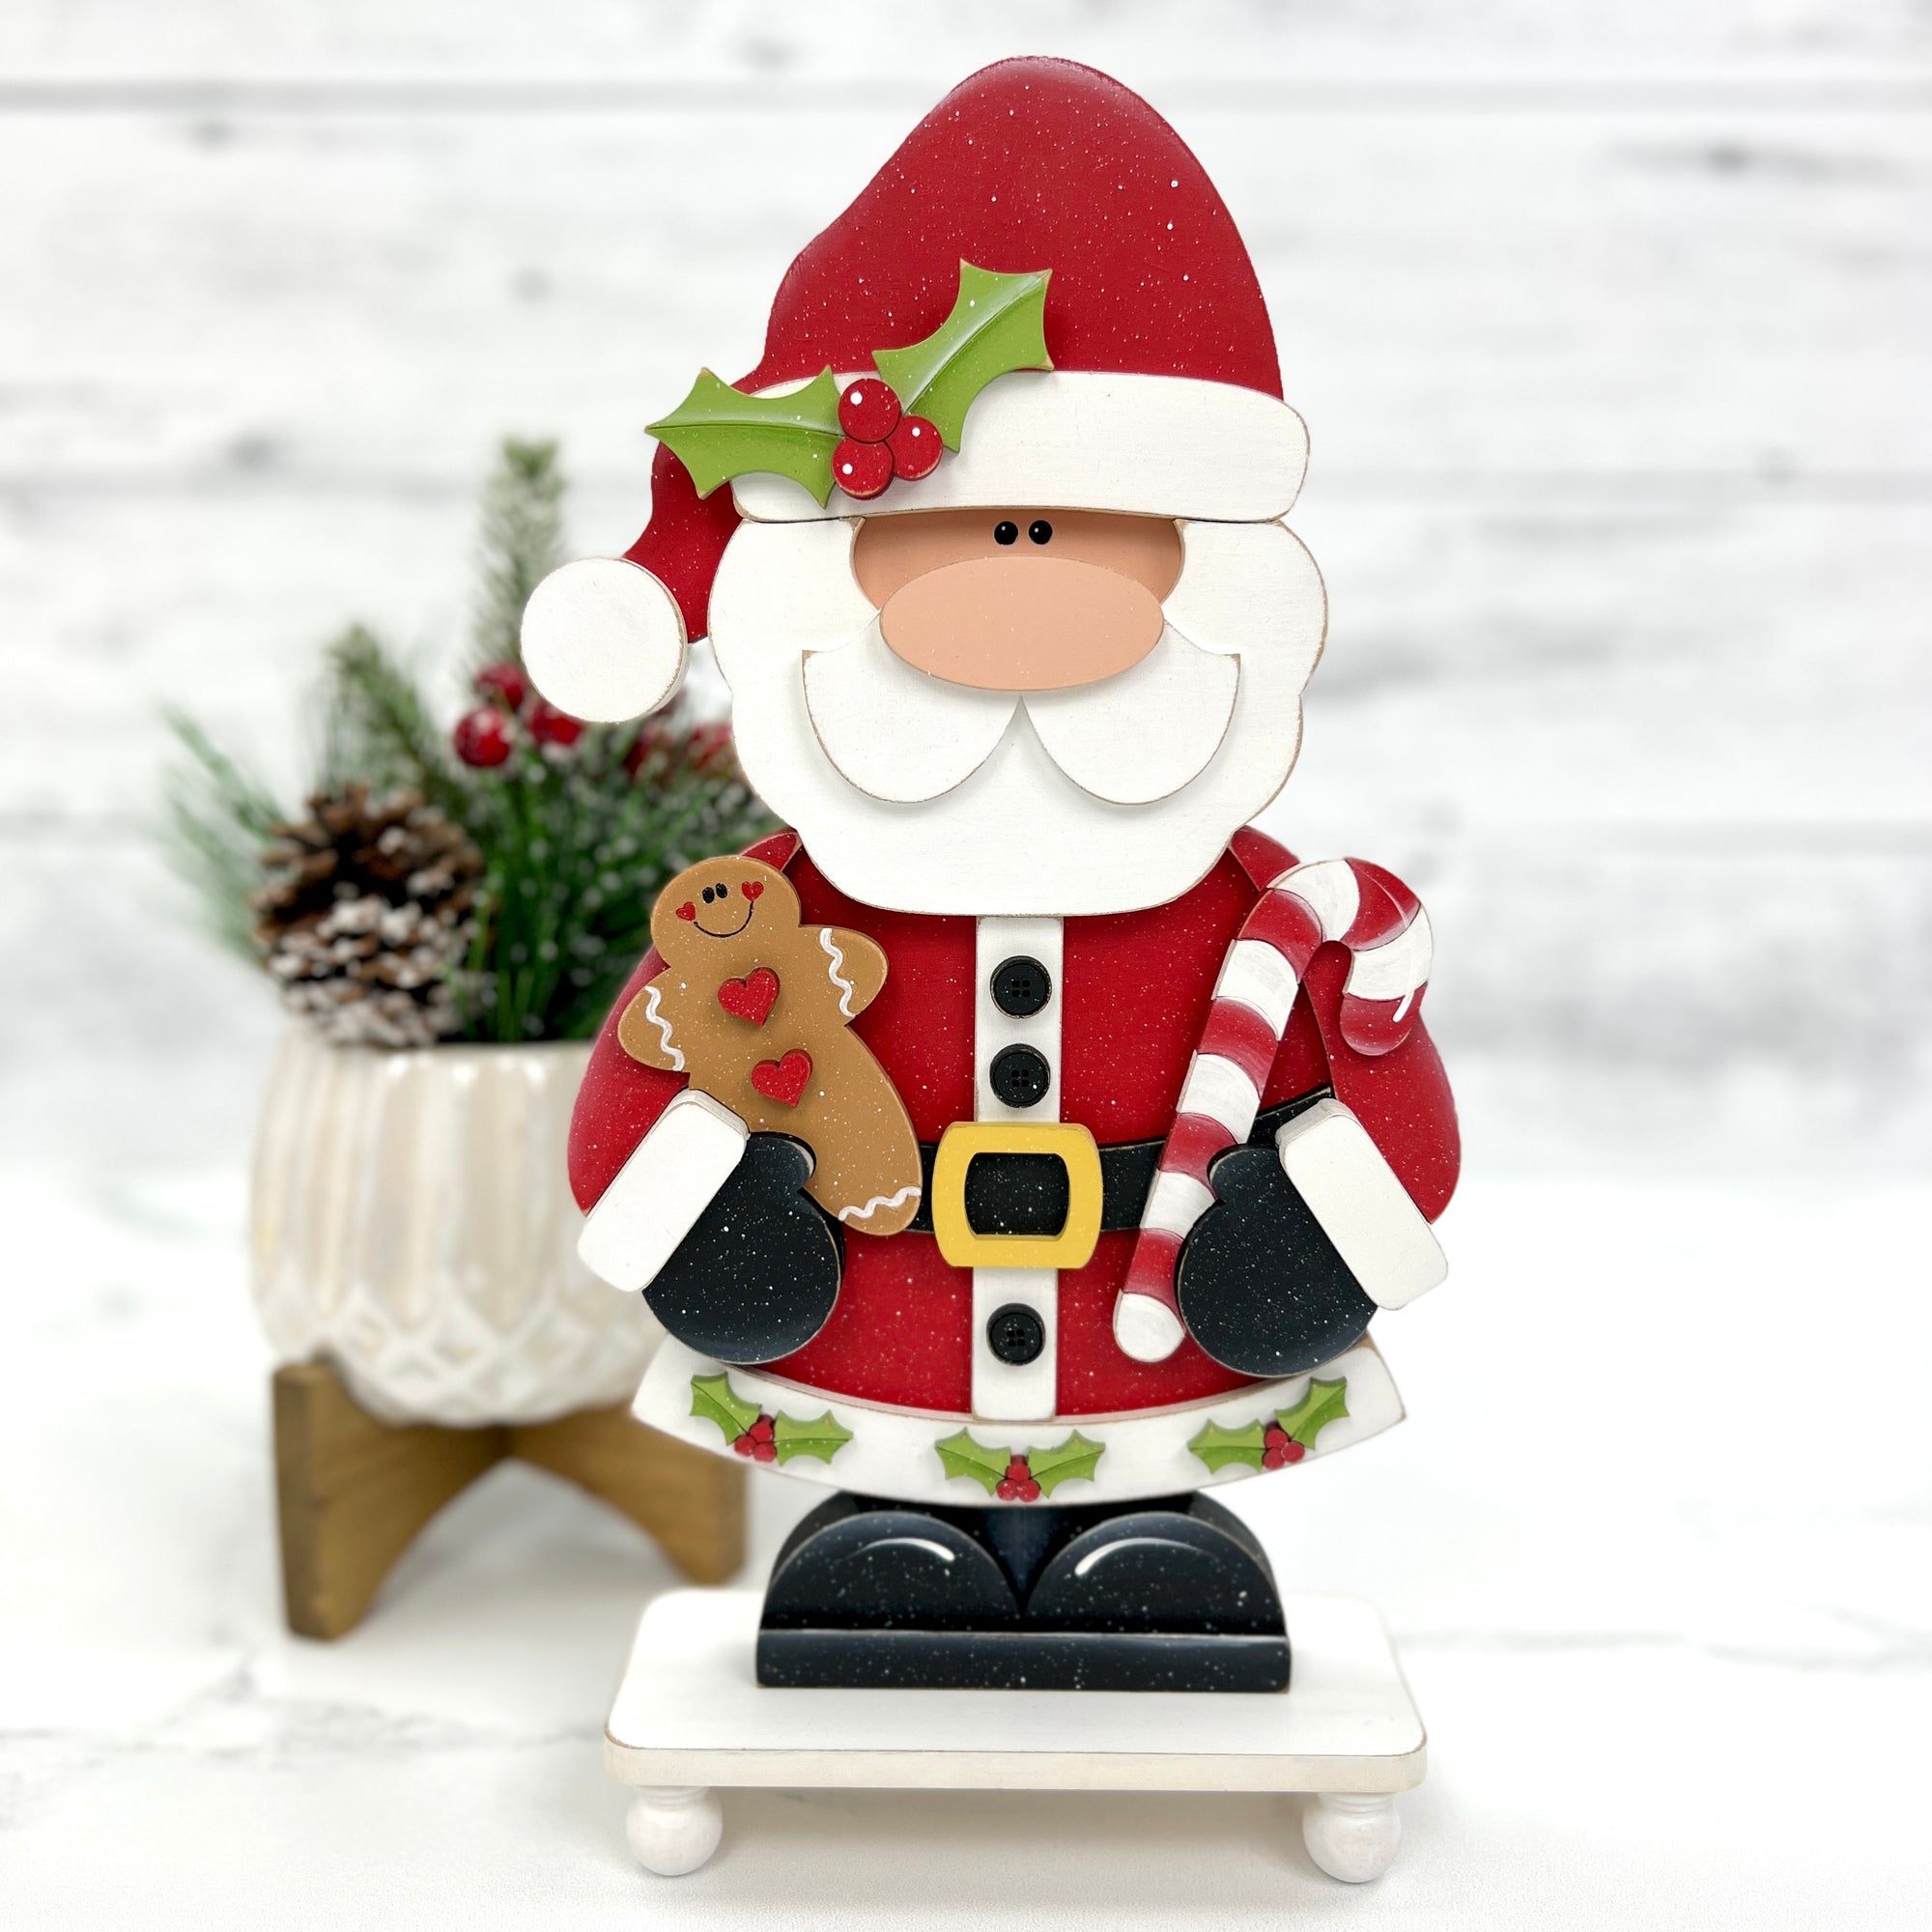 wood Santa claus holding a candy cane and gingerbread man for crafting 